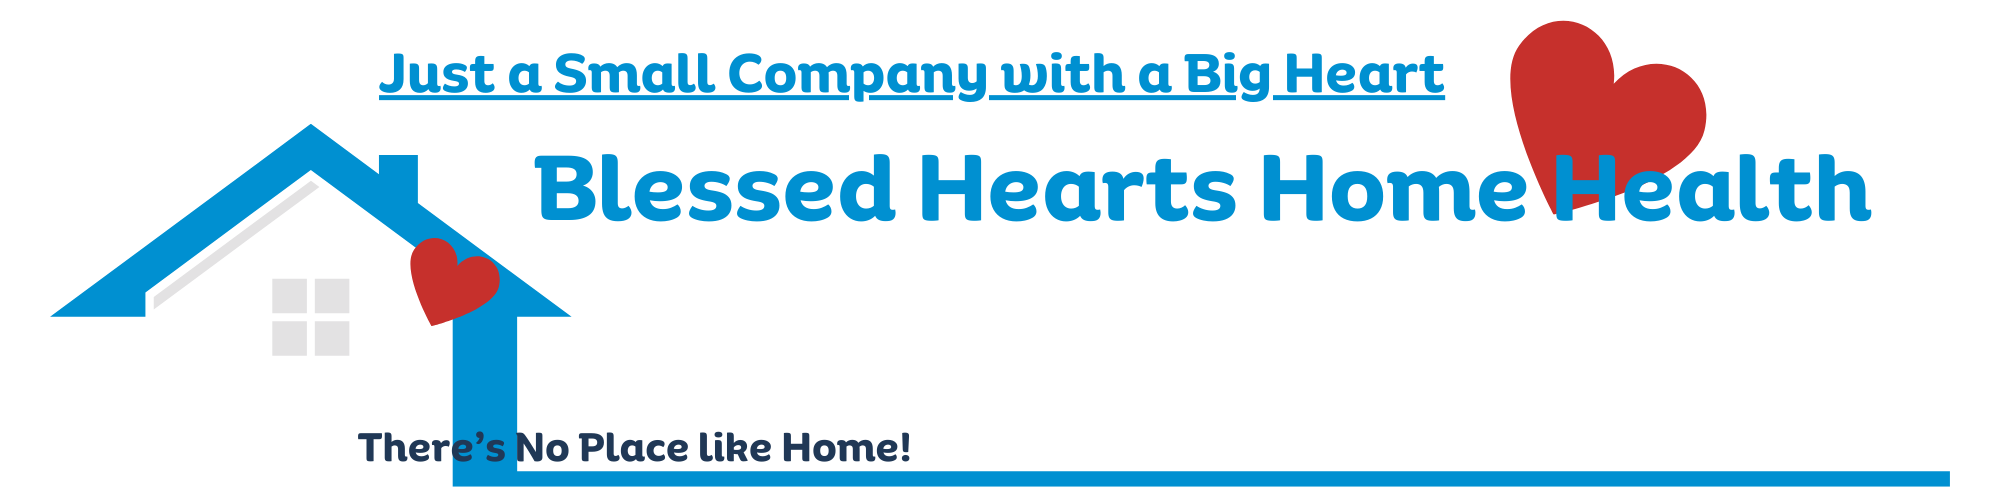 Blessed Hearts Home Health, LLC at Toms River, NJ